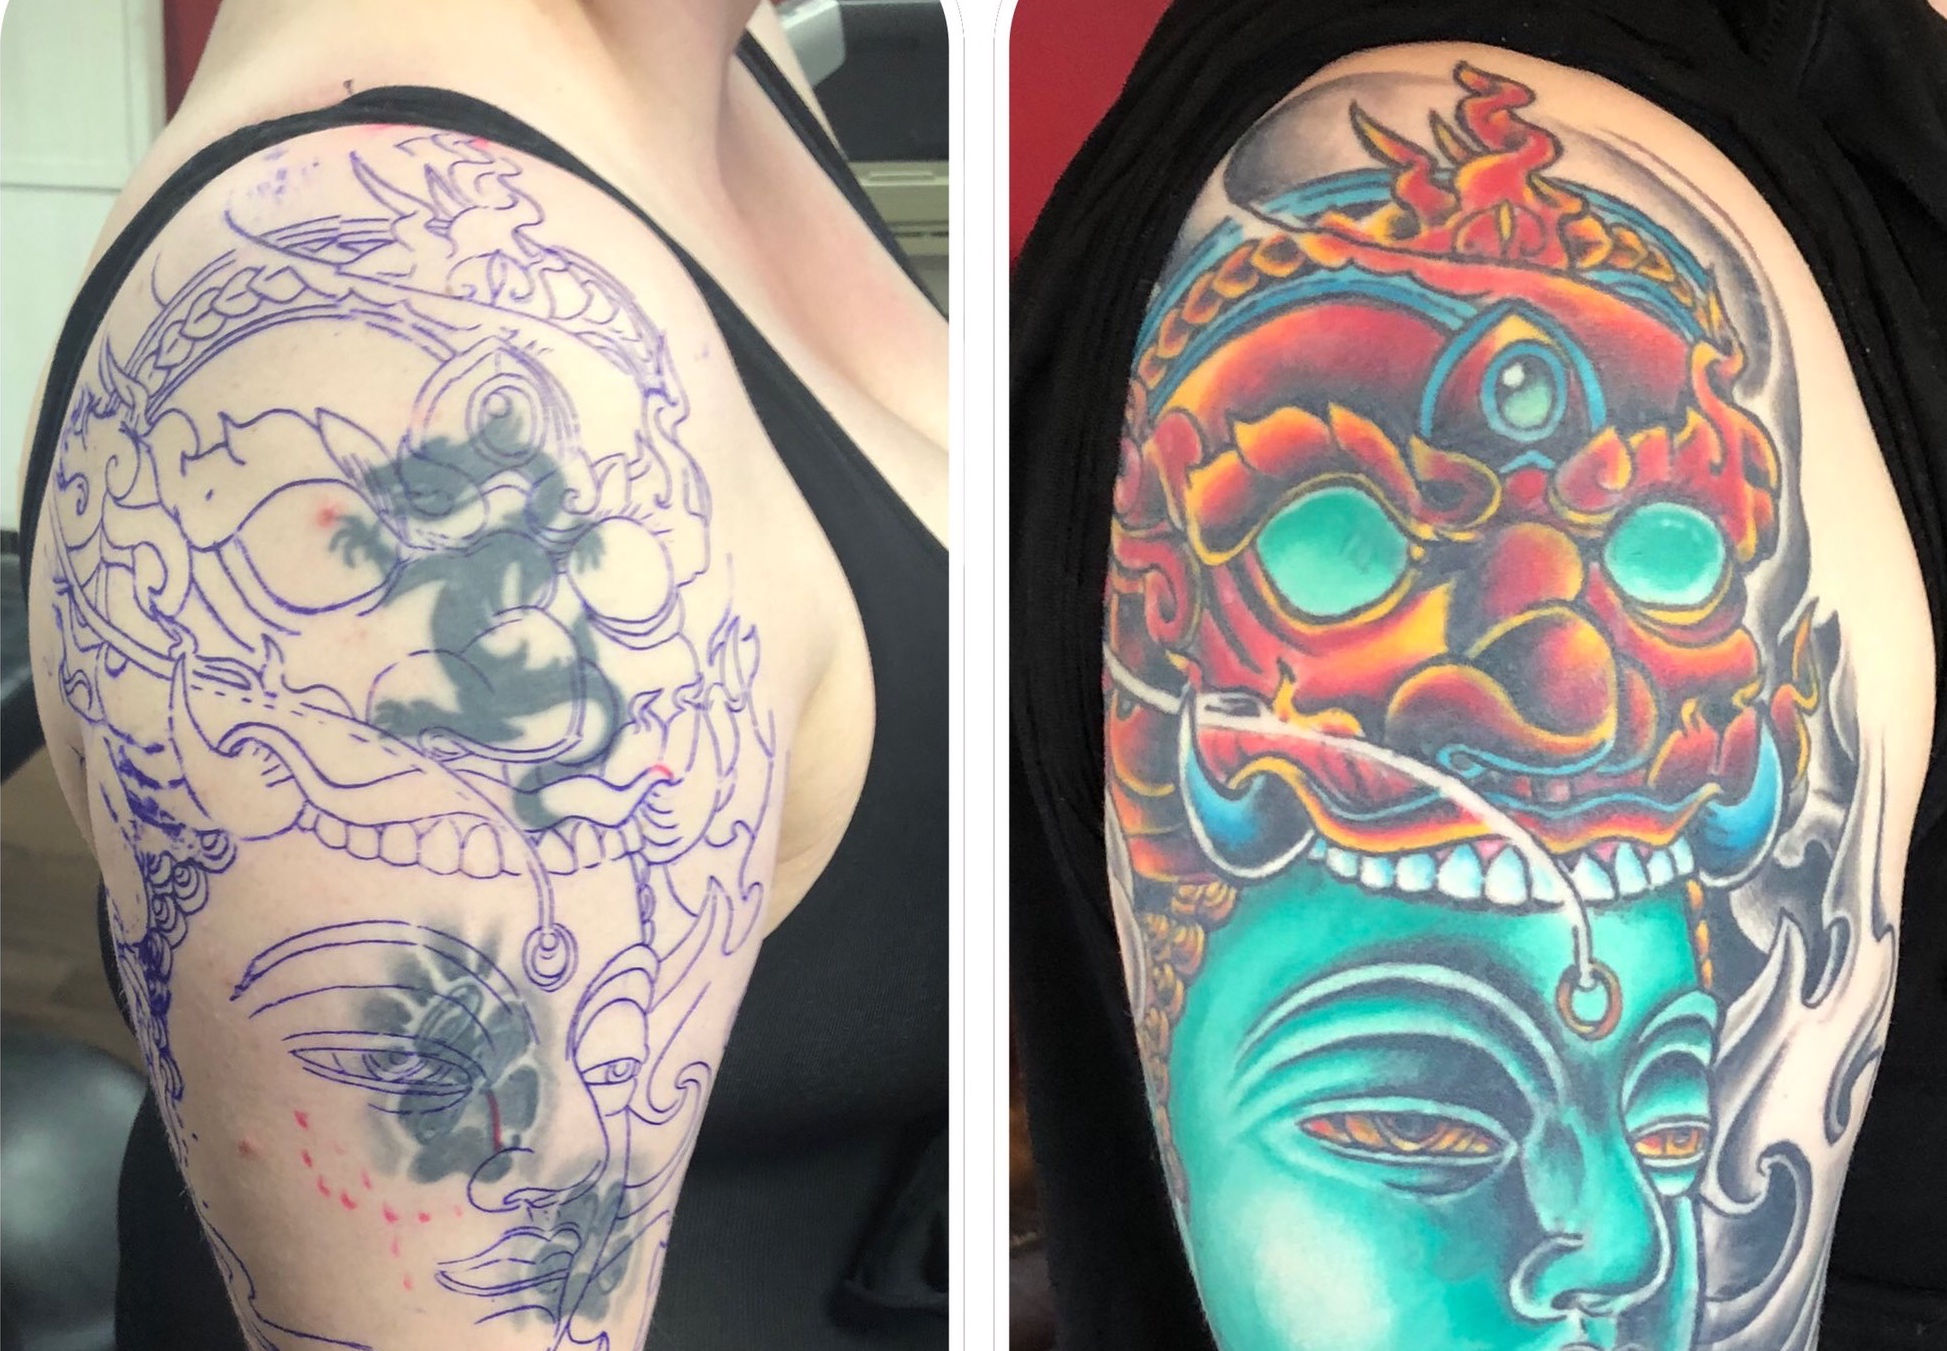 How to properly care for a tattoo: advice from dermatologists - Modista  Women's Magazine